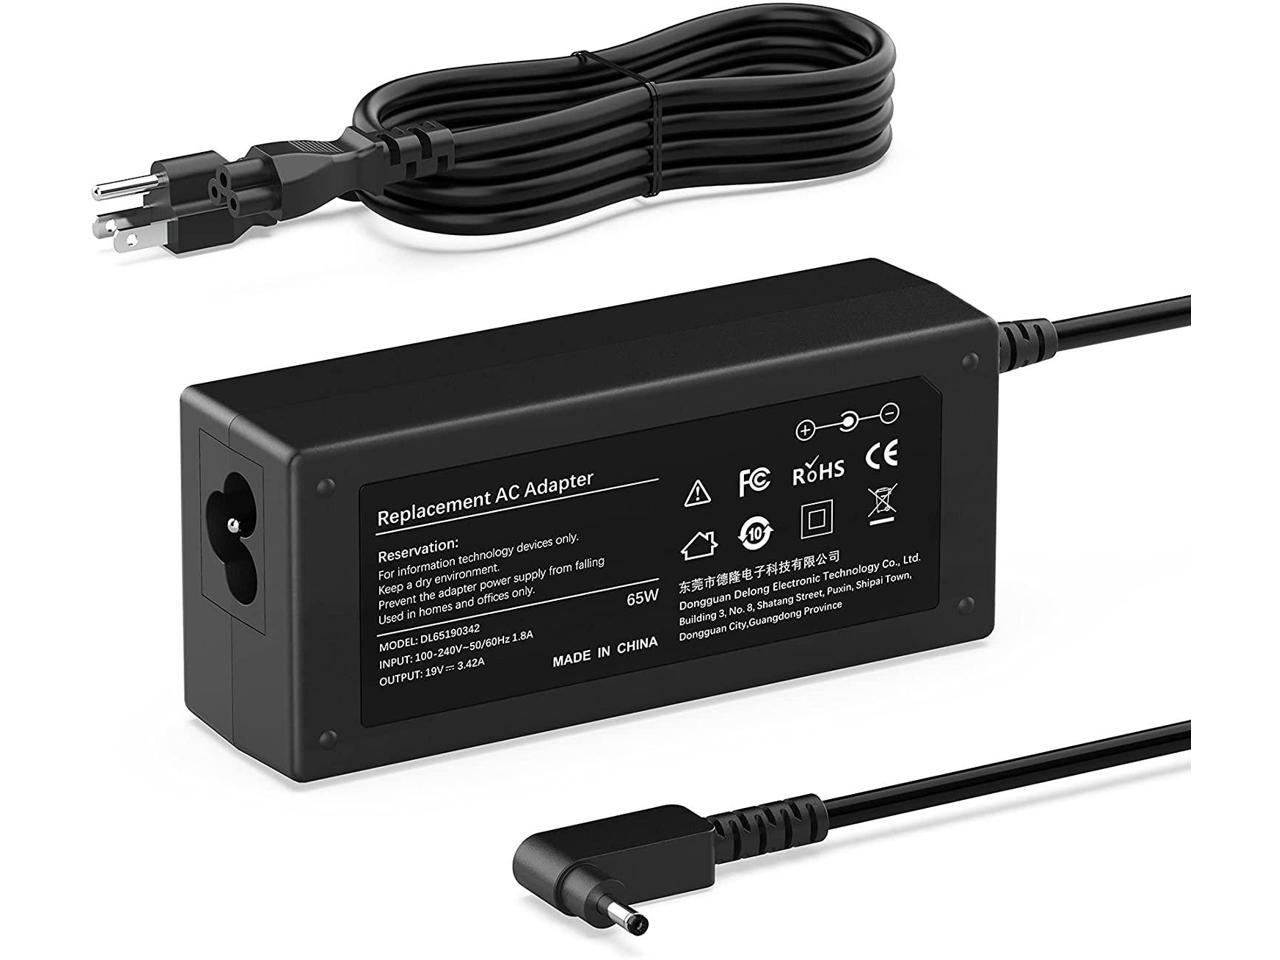 19V 3.42A 65W AC Adapter Laptop Charger Compatible for Acer Chromebook R11 11 13 14 15 C720 C720P C740 C810 CB3-431 CB3-131 CB3-532 CB5-571 N15Q8 N15Q9 N16P1 A11-065N1A A13-045N2A Power Supply Cord 